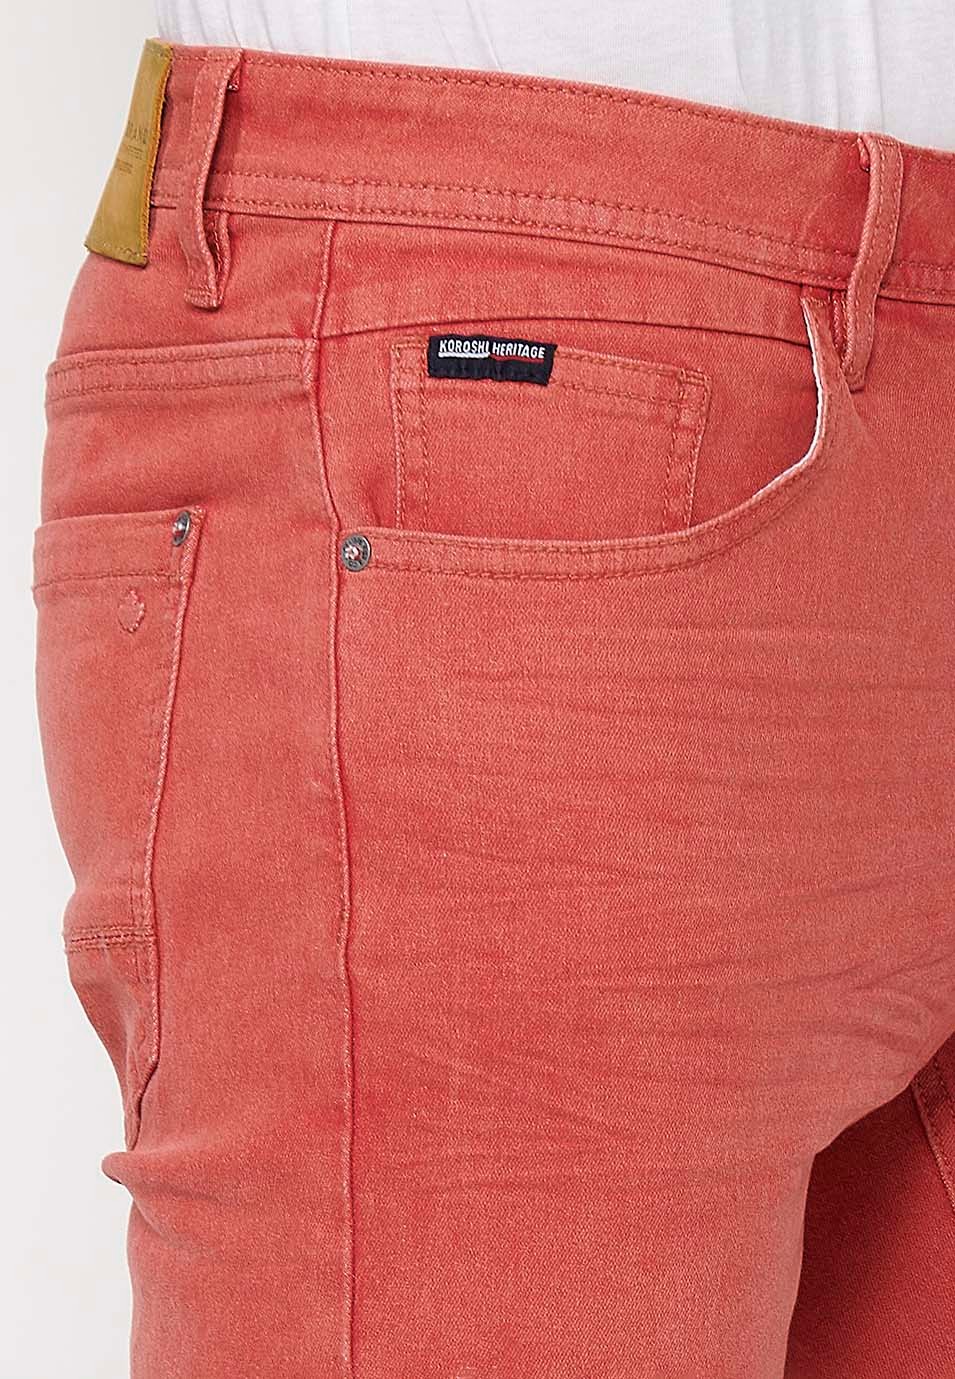 Shorts with a turn-up finish with front zipper and button closure and five pockets, one with a match pocket, in Red for Men 1